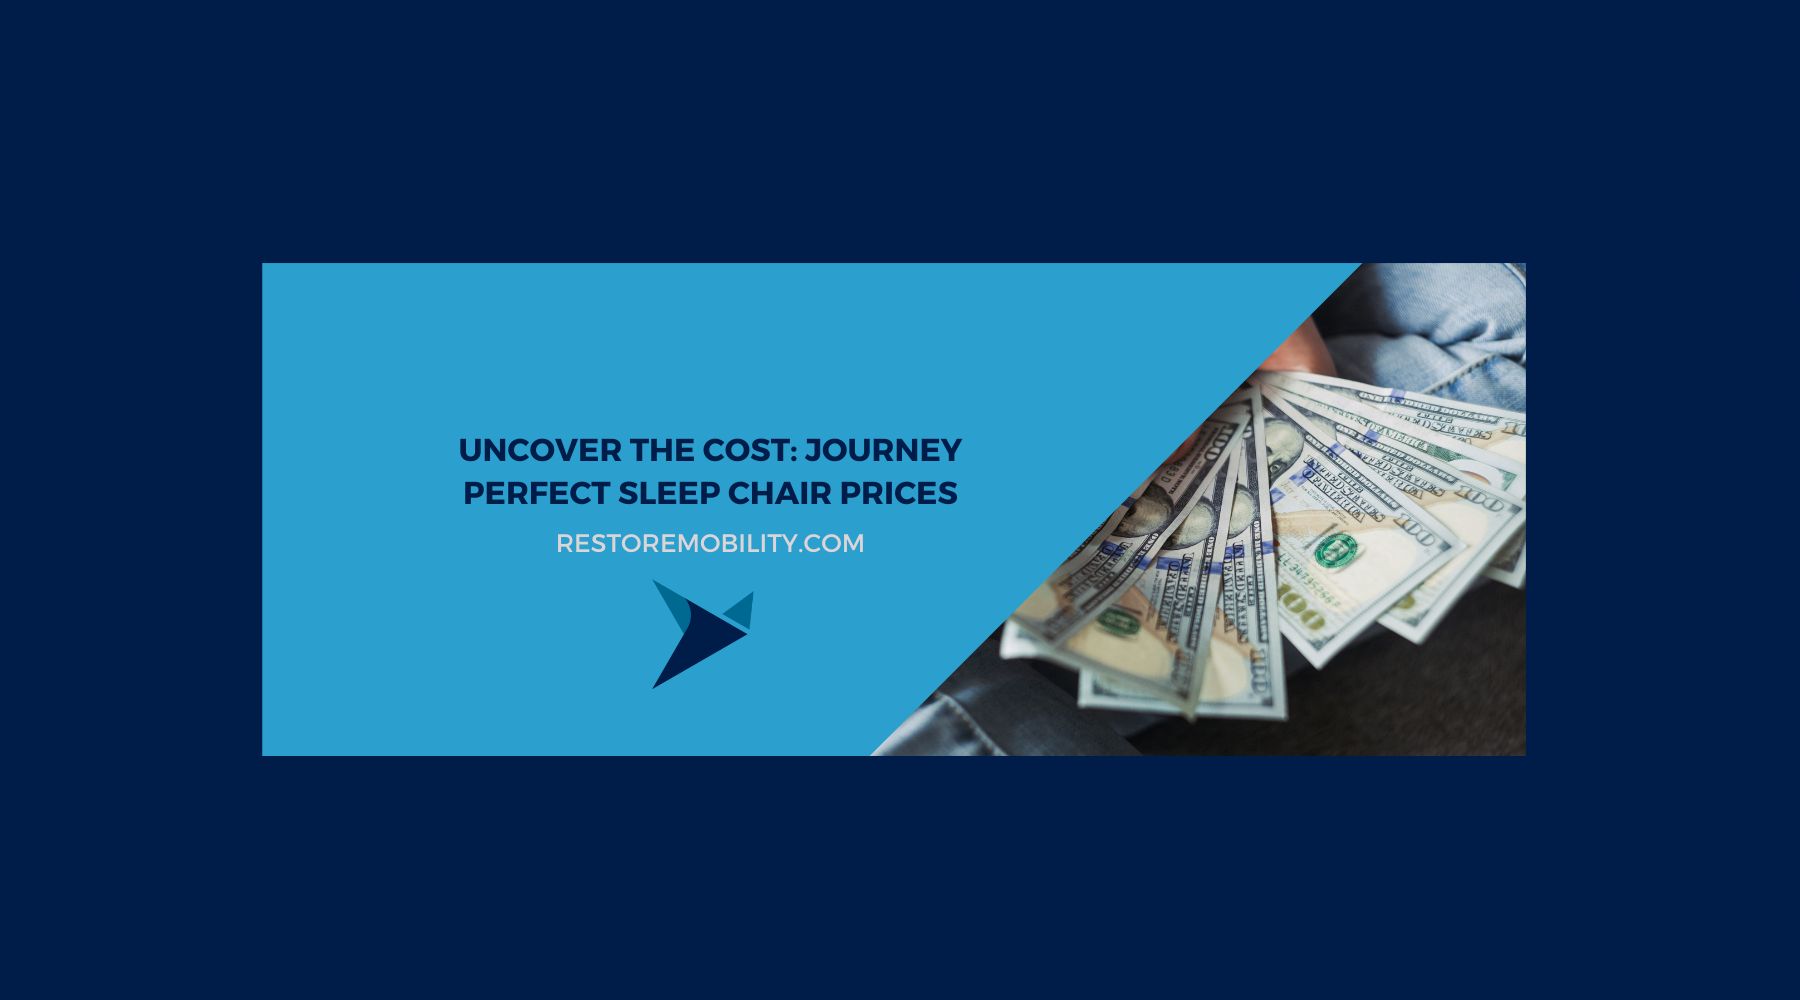 Uncover the Cost: Journey Perfect Sleep Chair Prices